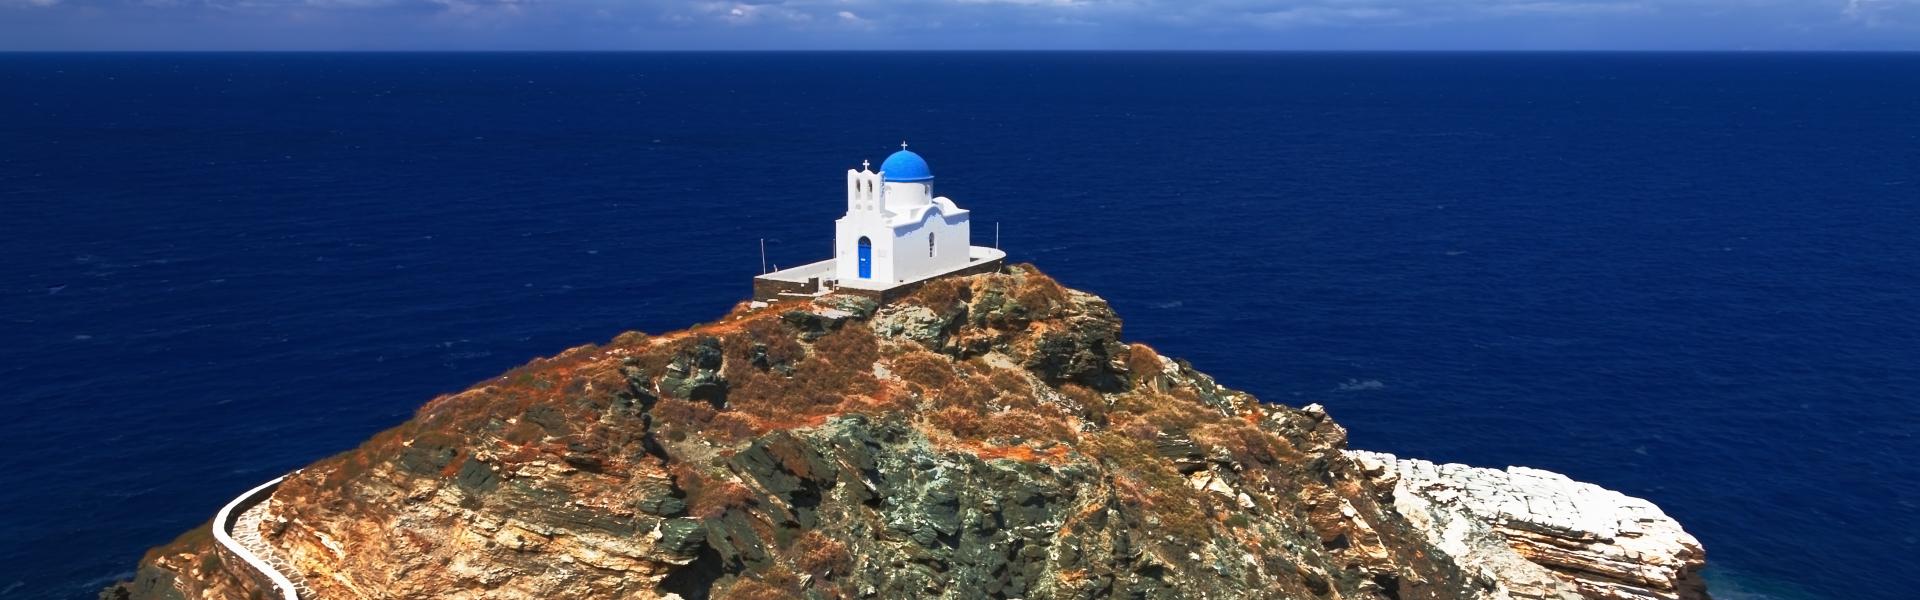 Sifnos Scenic View